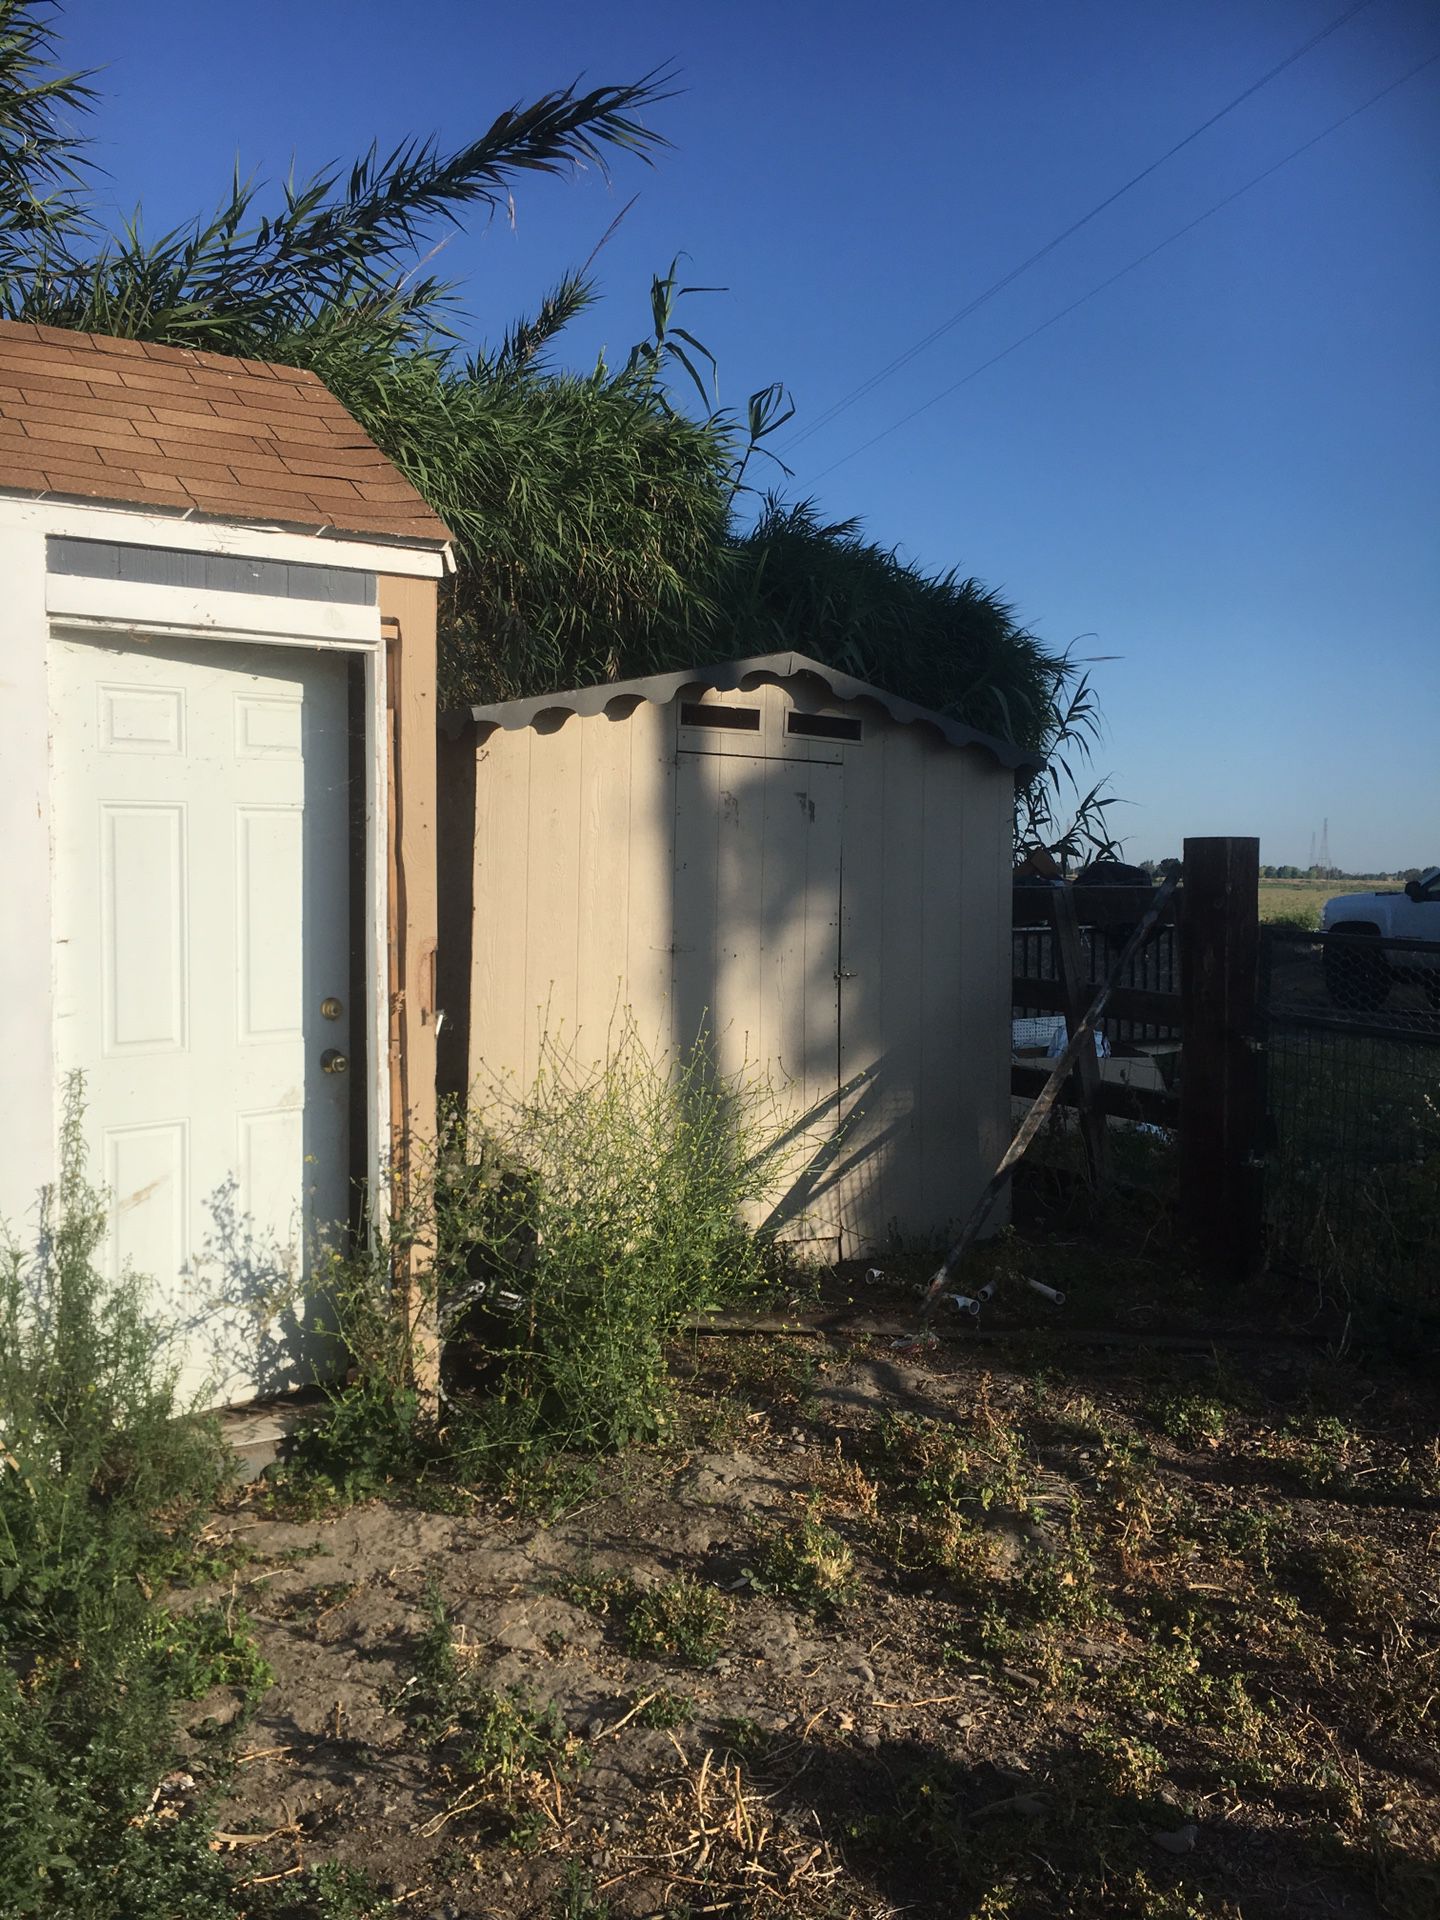 Two sheds need gone